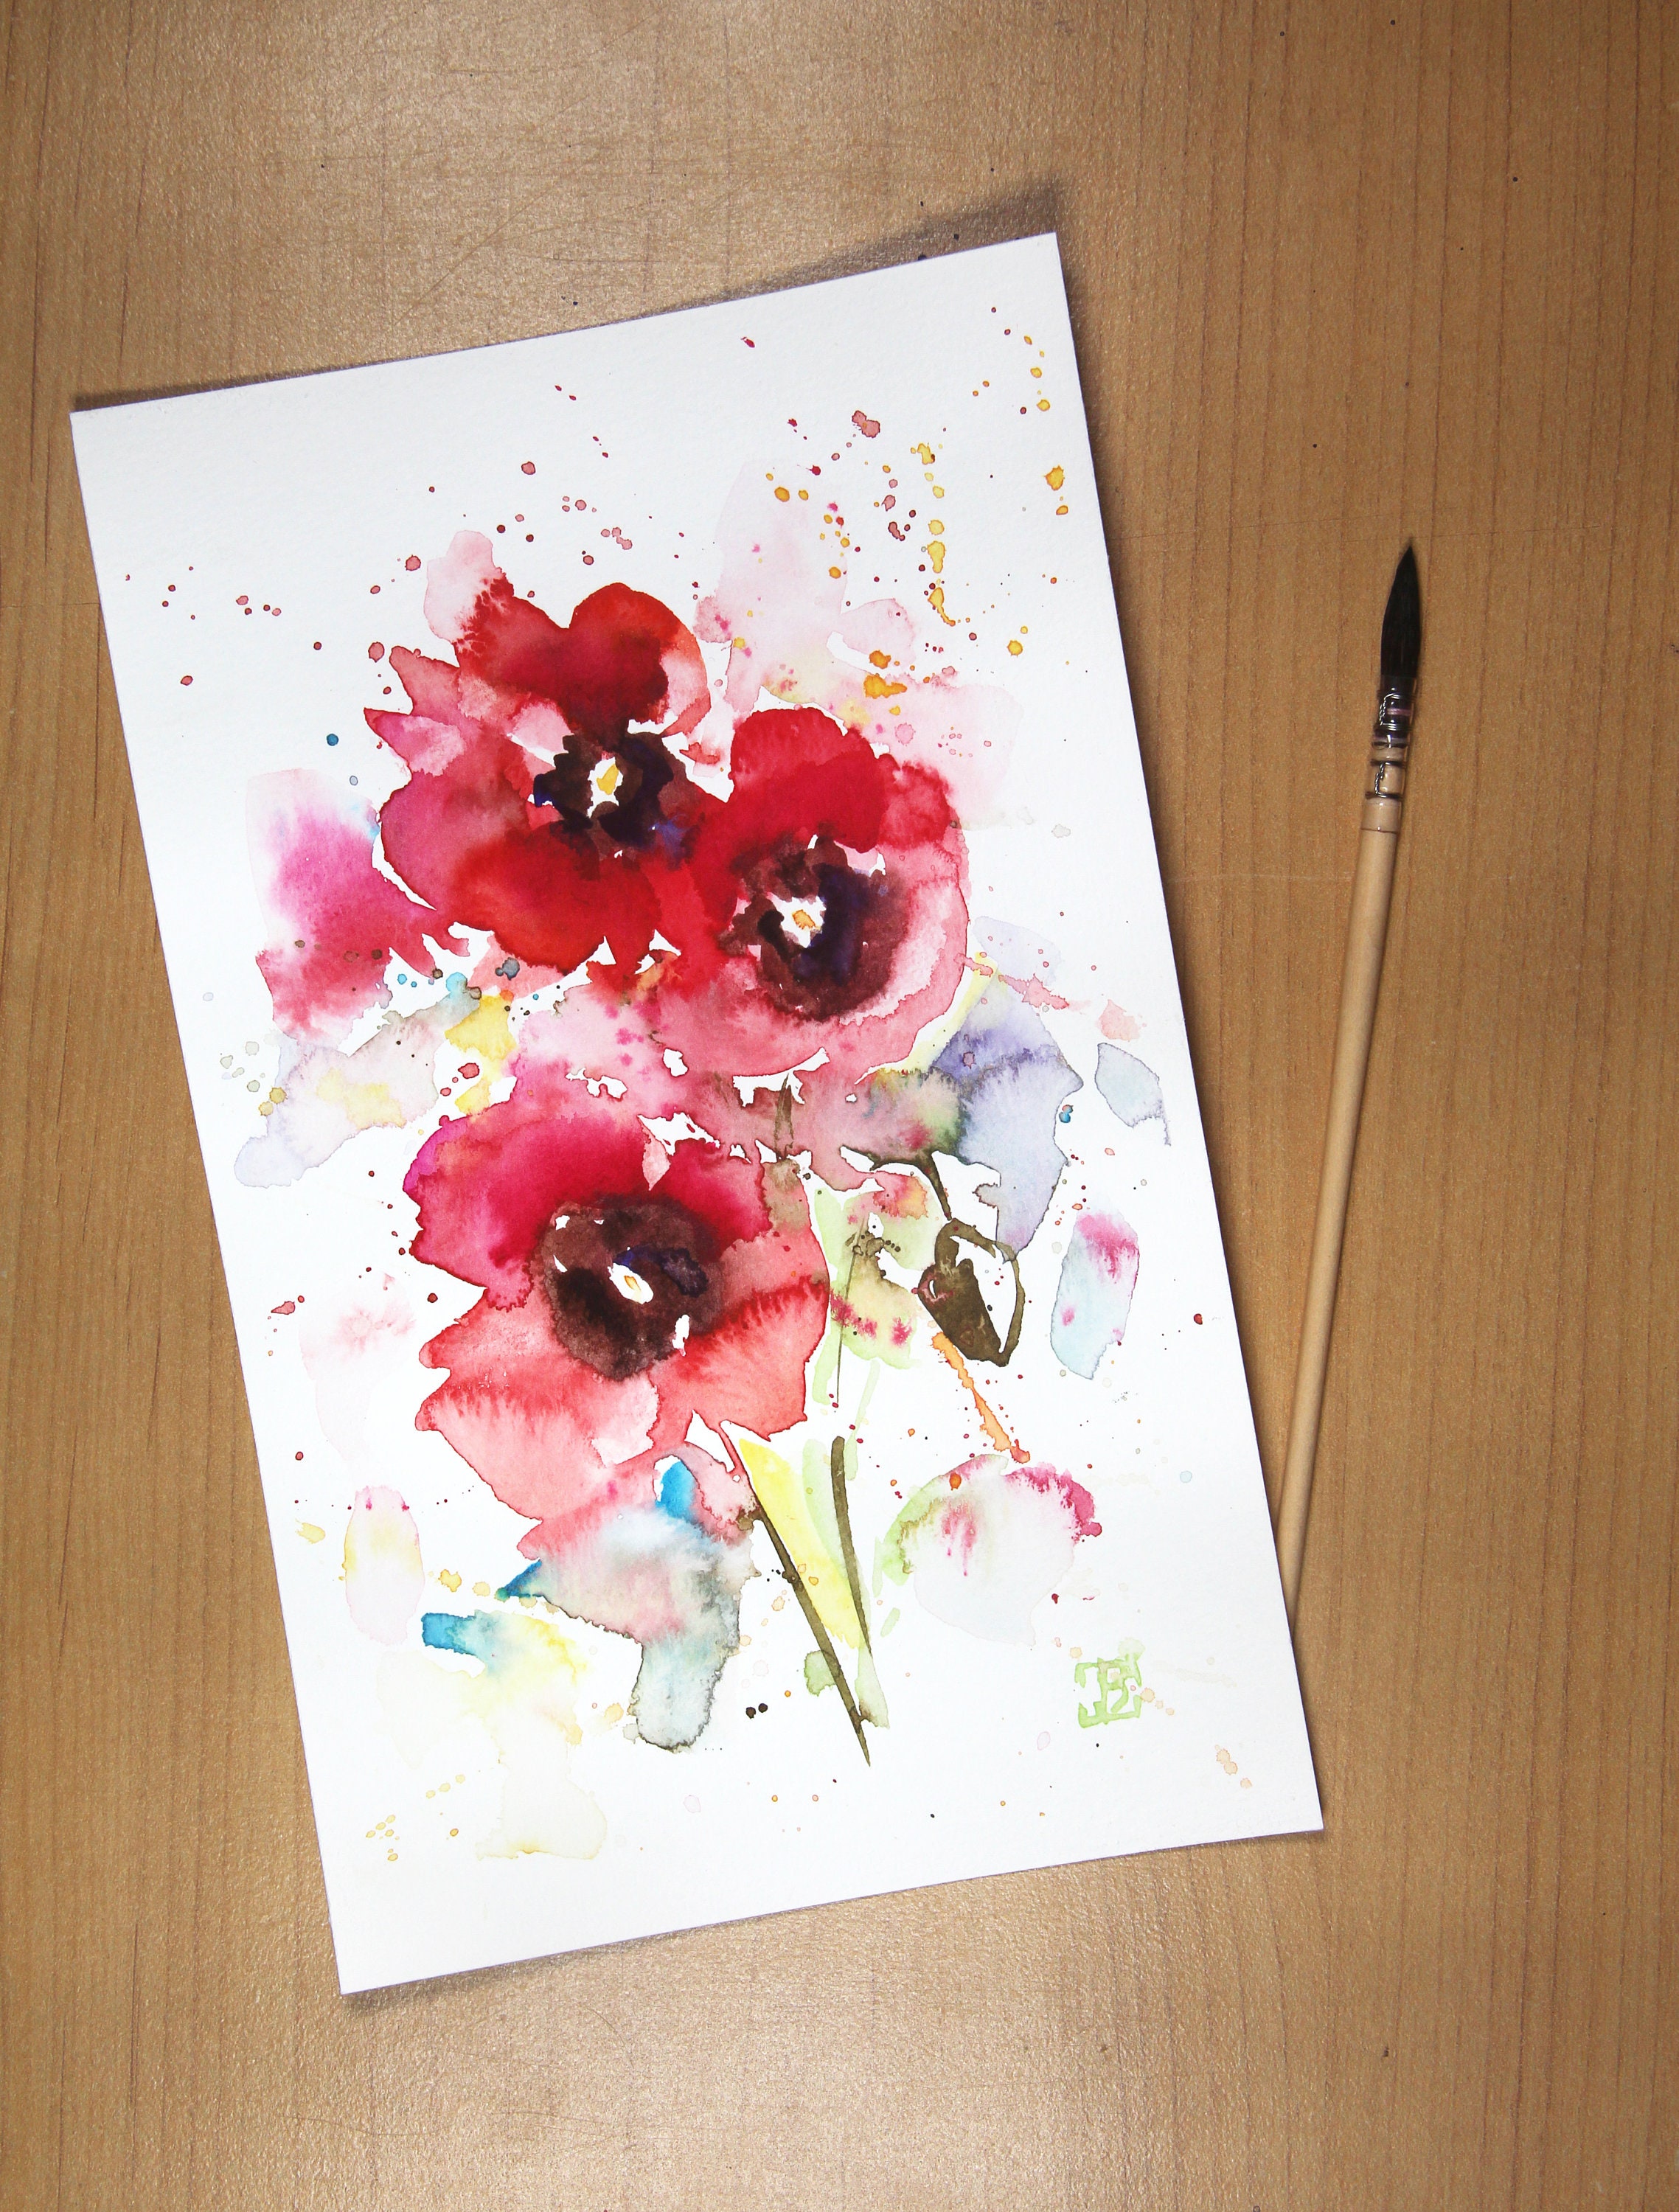 Poppy Original Watercolor Painting Red Floral Watercolor - Etsy